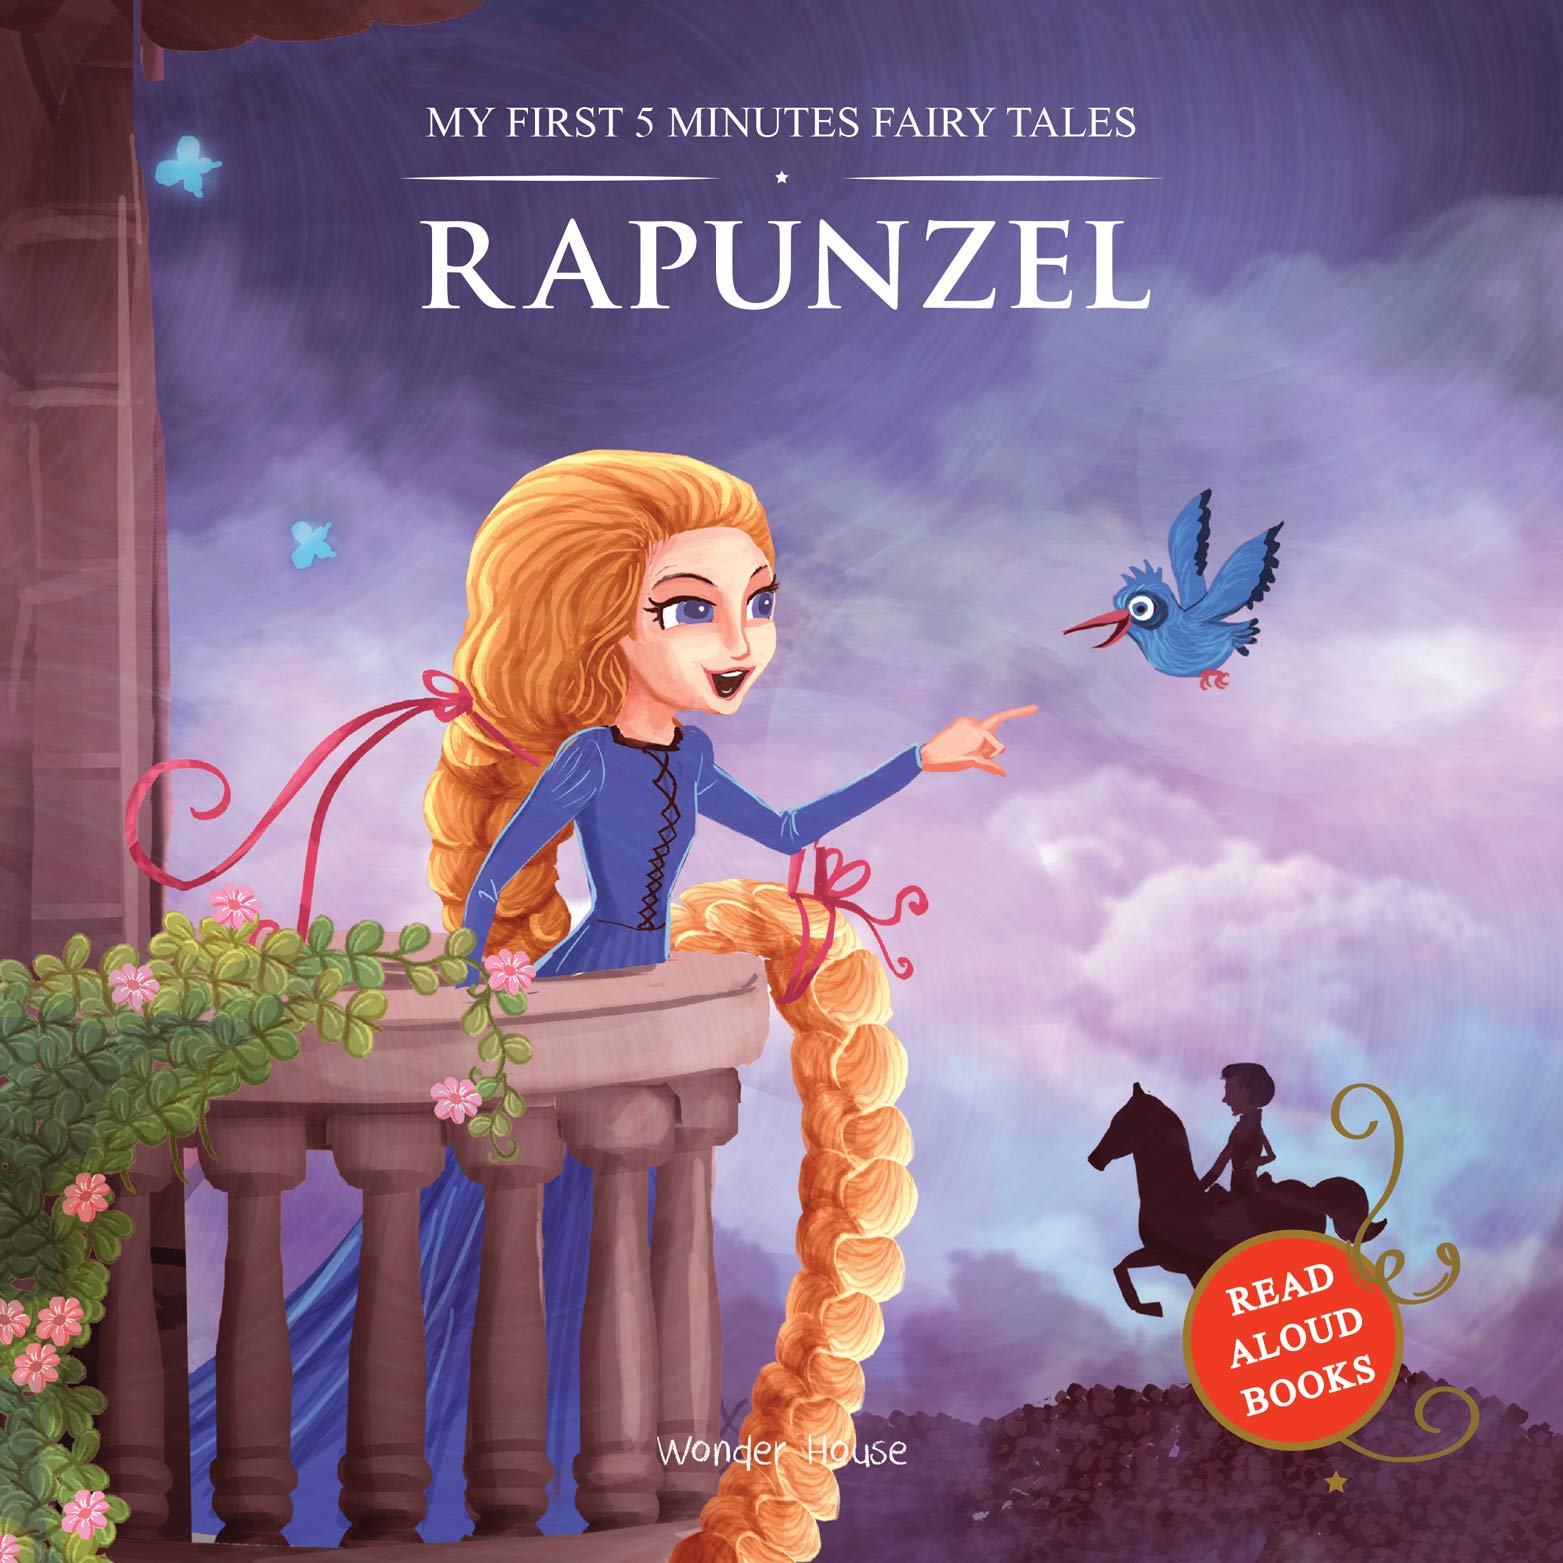 My First 5 Minutes Fairy Tales: Rapunzel